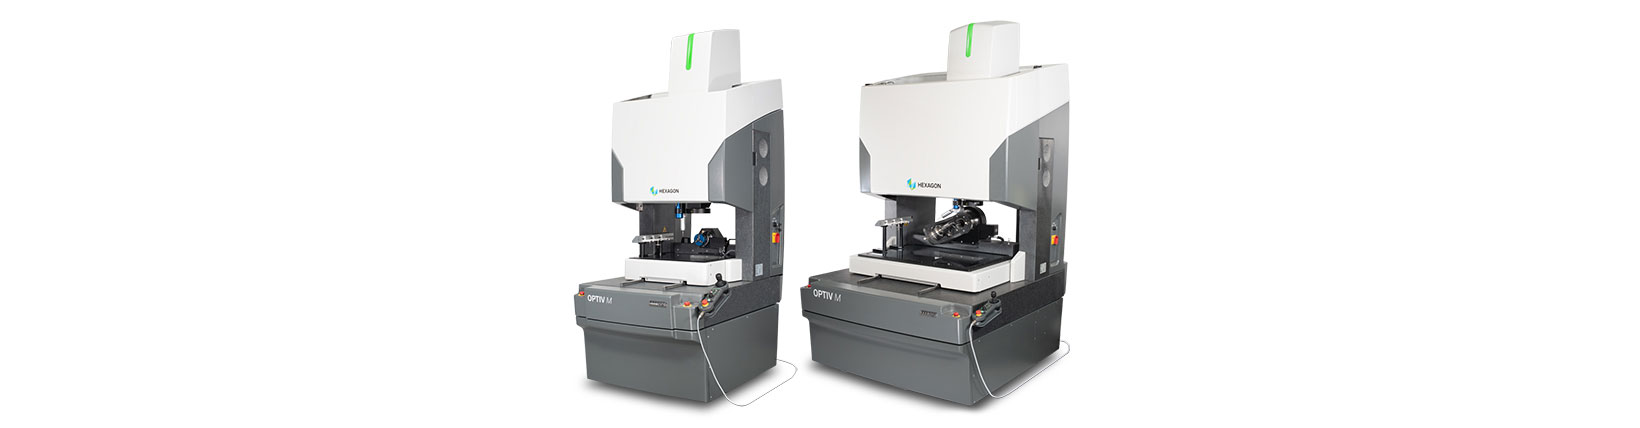 Two multisensor coordinate measuring machines next to each other on white background